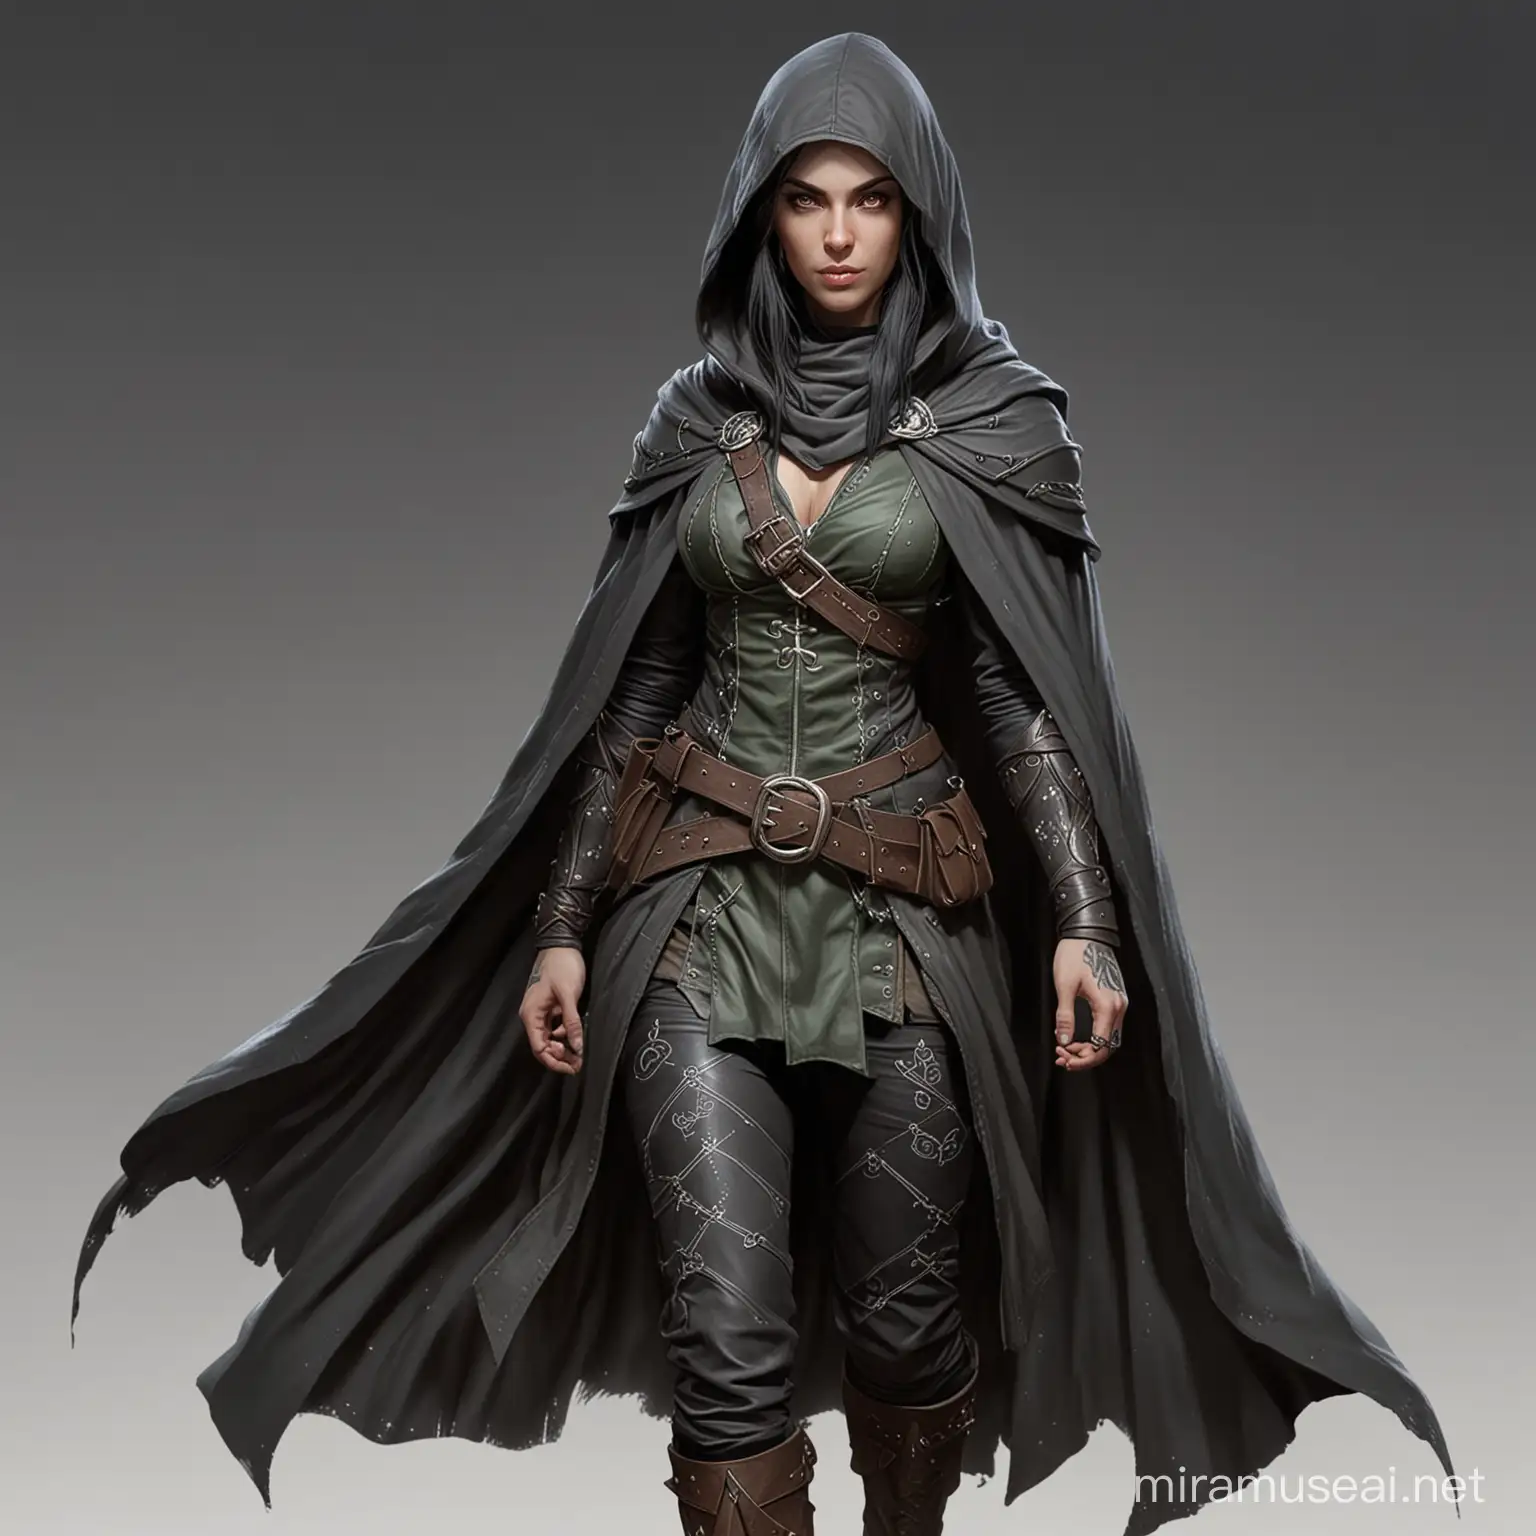 DND 5e Full Body Female ranger Aged pale elf with black lobbed hair and cloudy gray eyes covered in tattoos in a hooded cape cloak.